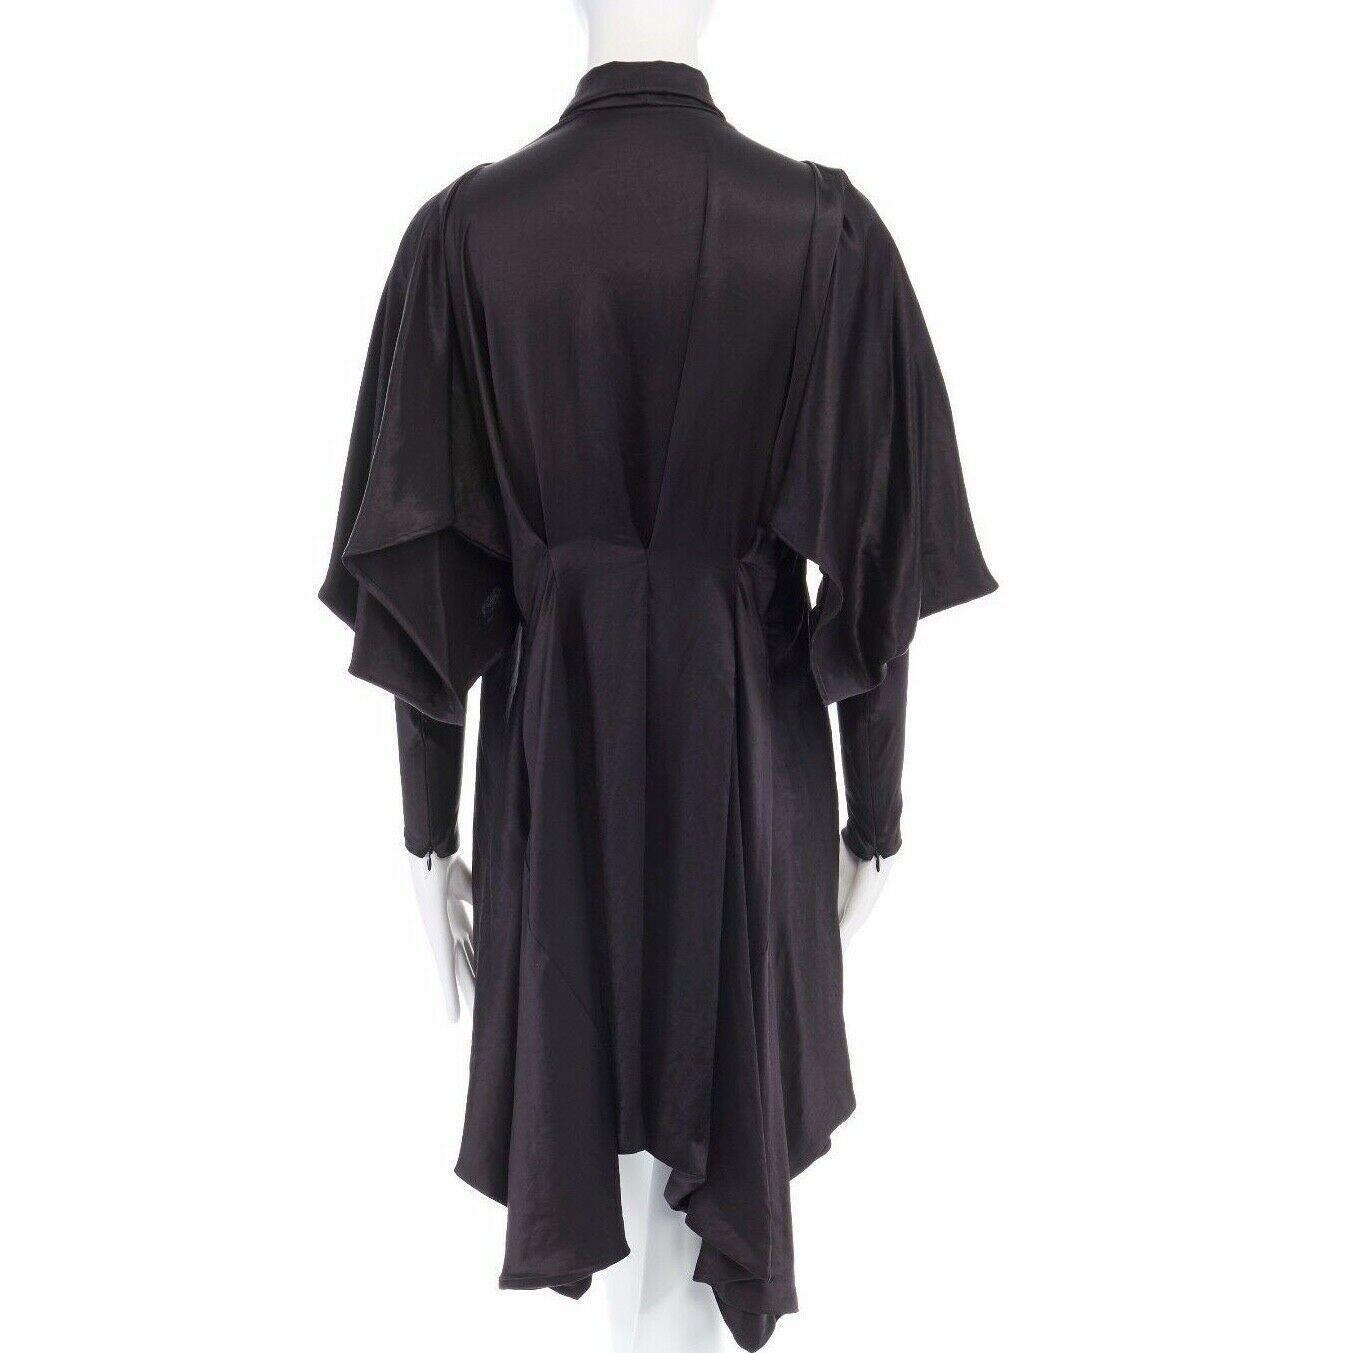 new ALEXANDER MCQUEEN Runway SS08 black single button kimono mini dress IT38 XS

ALEXANDER MCQUEEN
FROM THE SPRING SUMMER 2008 RUNWAY

Black triacetate, polyester . Shawl collar . Concealed single button closure . 
Pleated at shoulder . Kimono